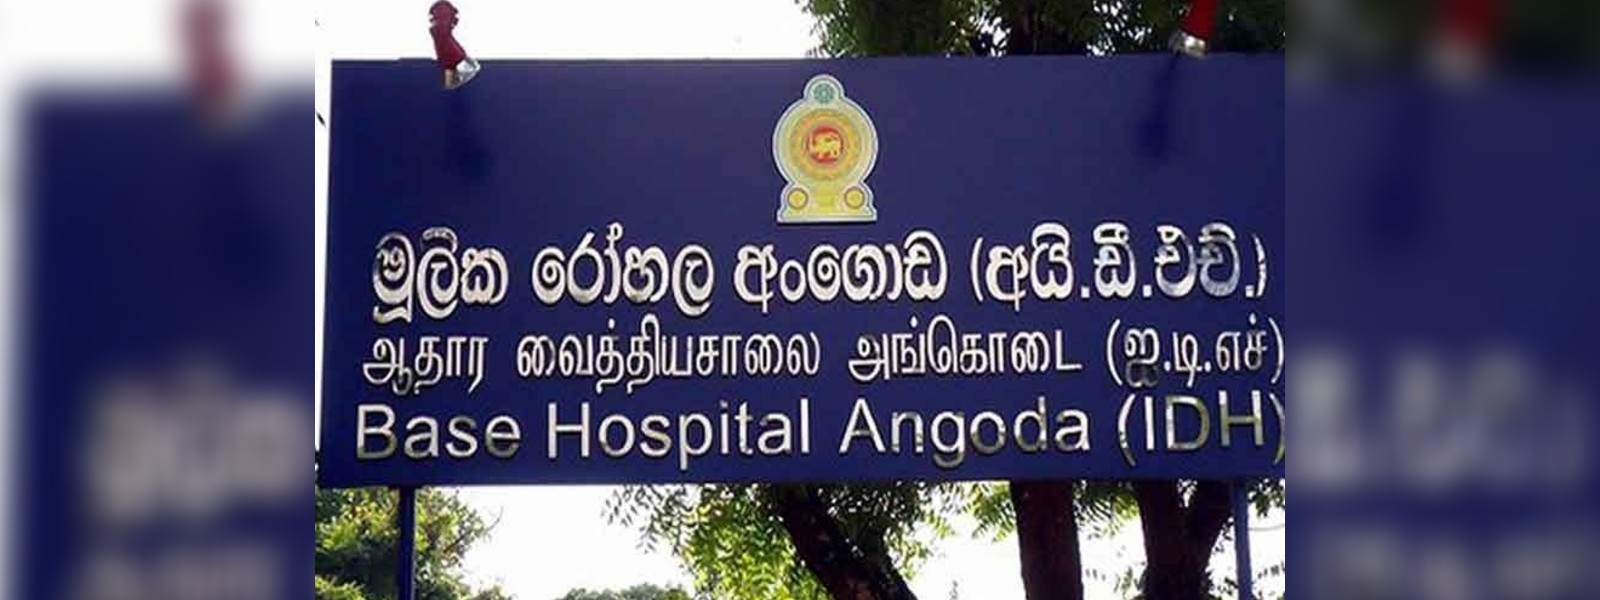 First Sri Lankan COVID-19 patient recovers